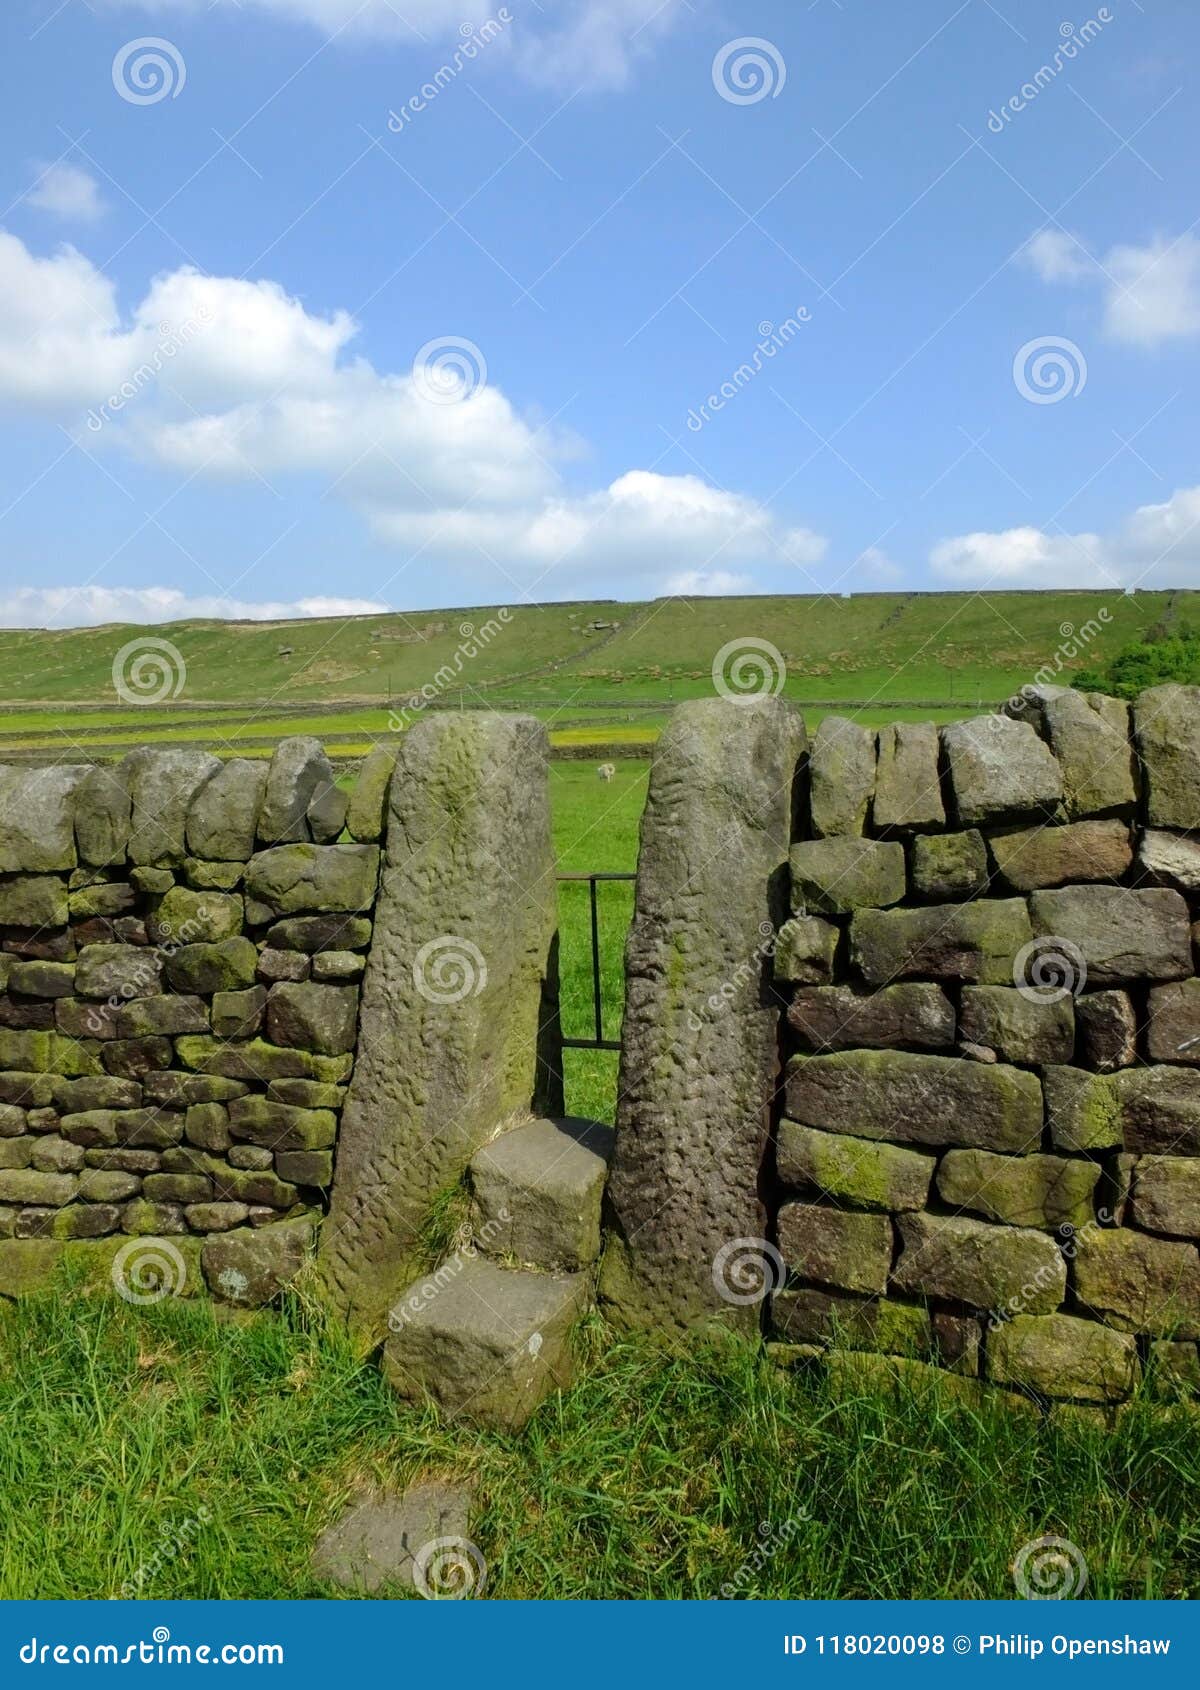 a dry stone wall with stone stile or narrow gate with steps in a yorkshire dales hillside meadow with a bright blue summer sky